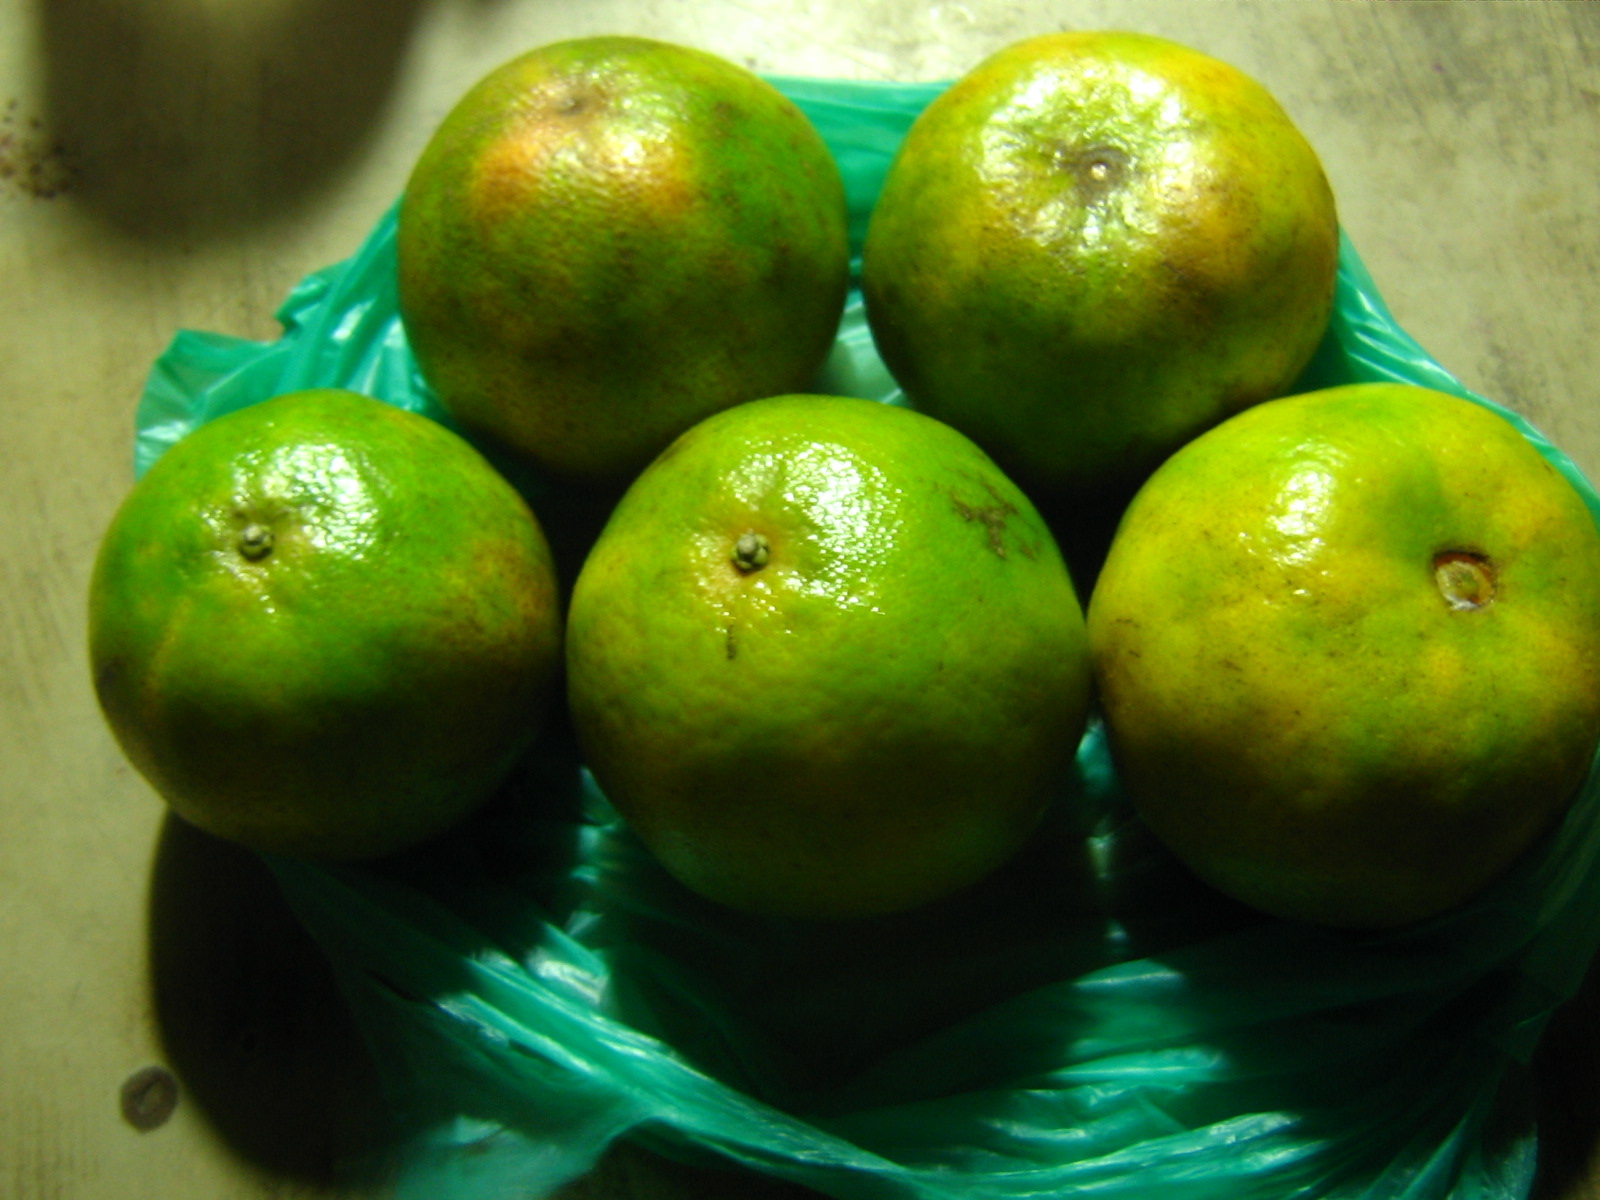 six green pears sitting in a plastic bowl